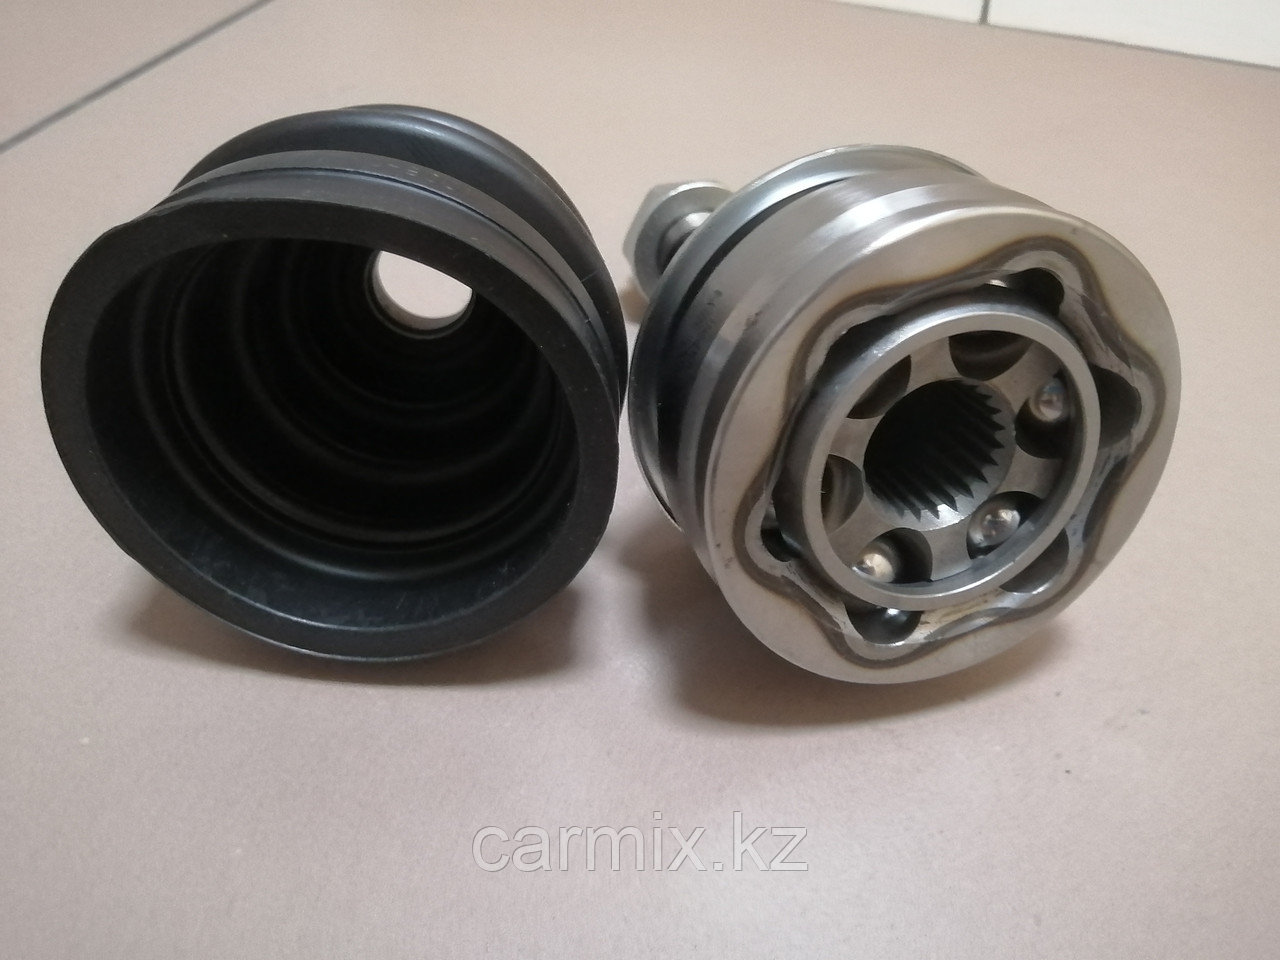 TO-082, TO-82, ШРУС (граната) наружняя TOYOTA YARIS NCP90, NCP93 2005-2011, HDK, MADE IN JAPAN, 23T*55.6*26T - фото 5 - id-p95125249